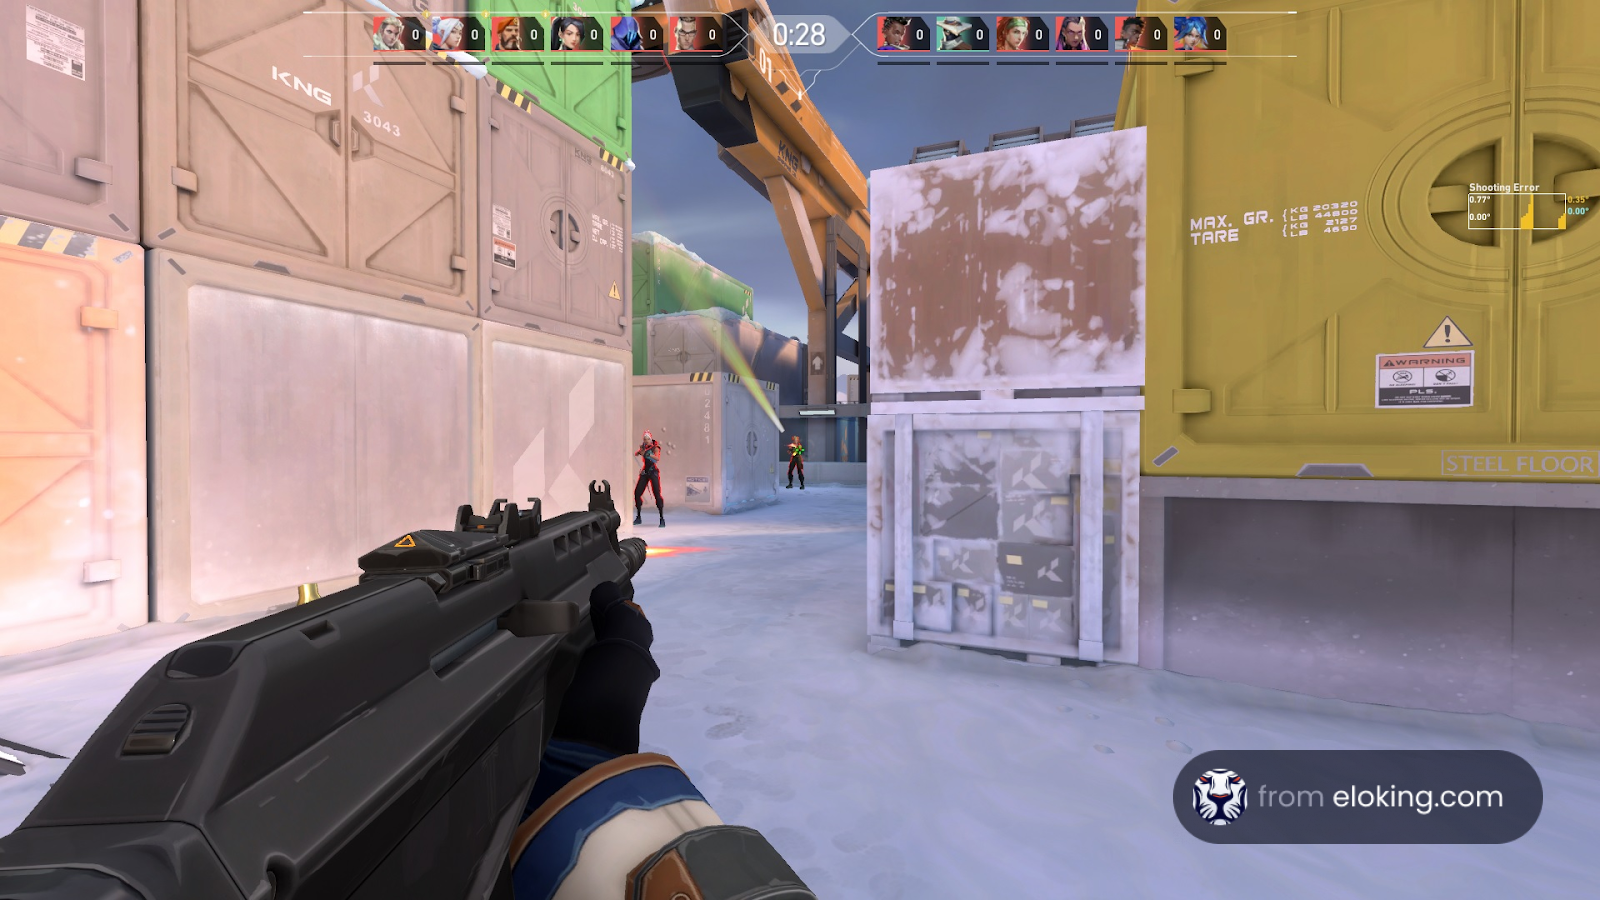 First person view of a shooter game character aiming at enemies in a snowy map